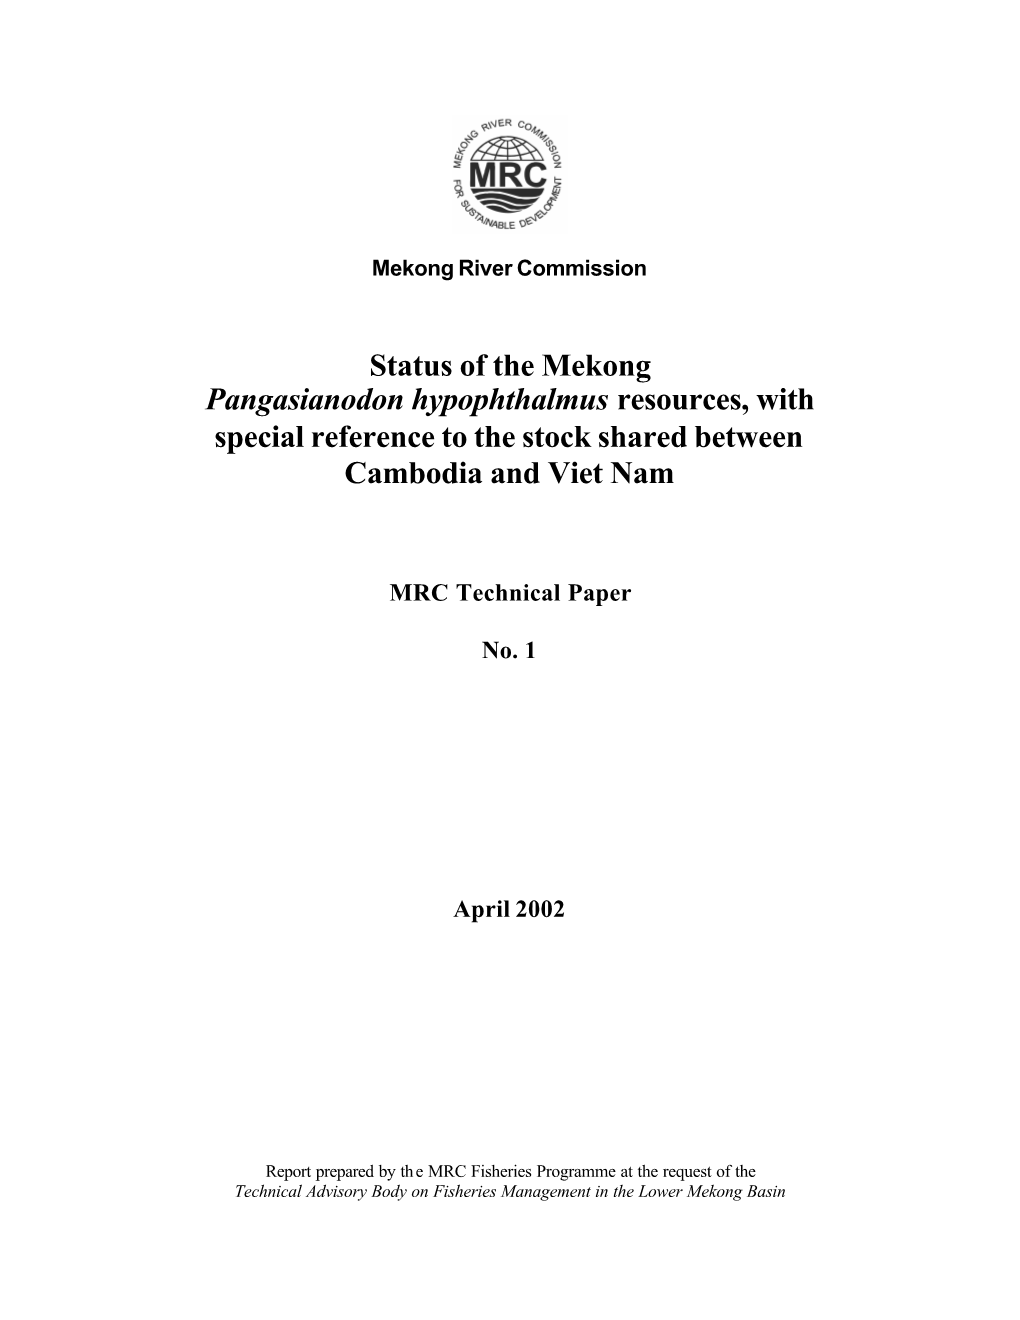 Status of the Mekong Pangasianodon Hypophthalmus Resources, with Special Reference to the Stock Shared Between Cambodia and Viet Nam